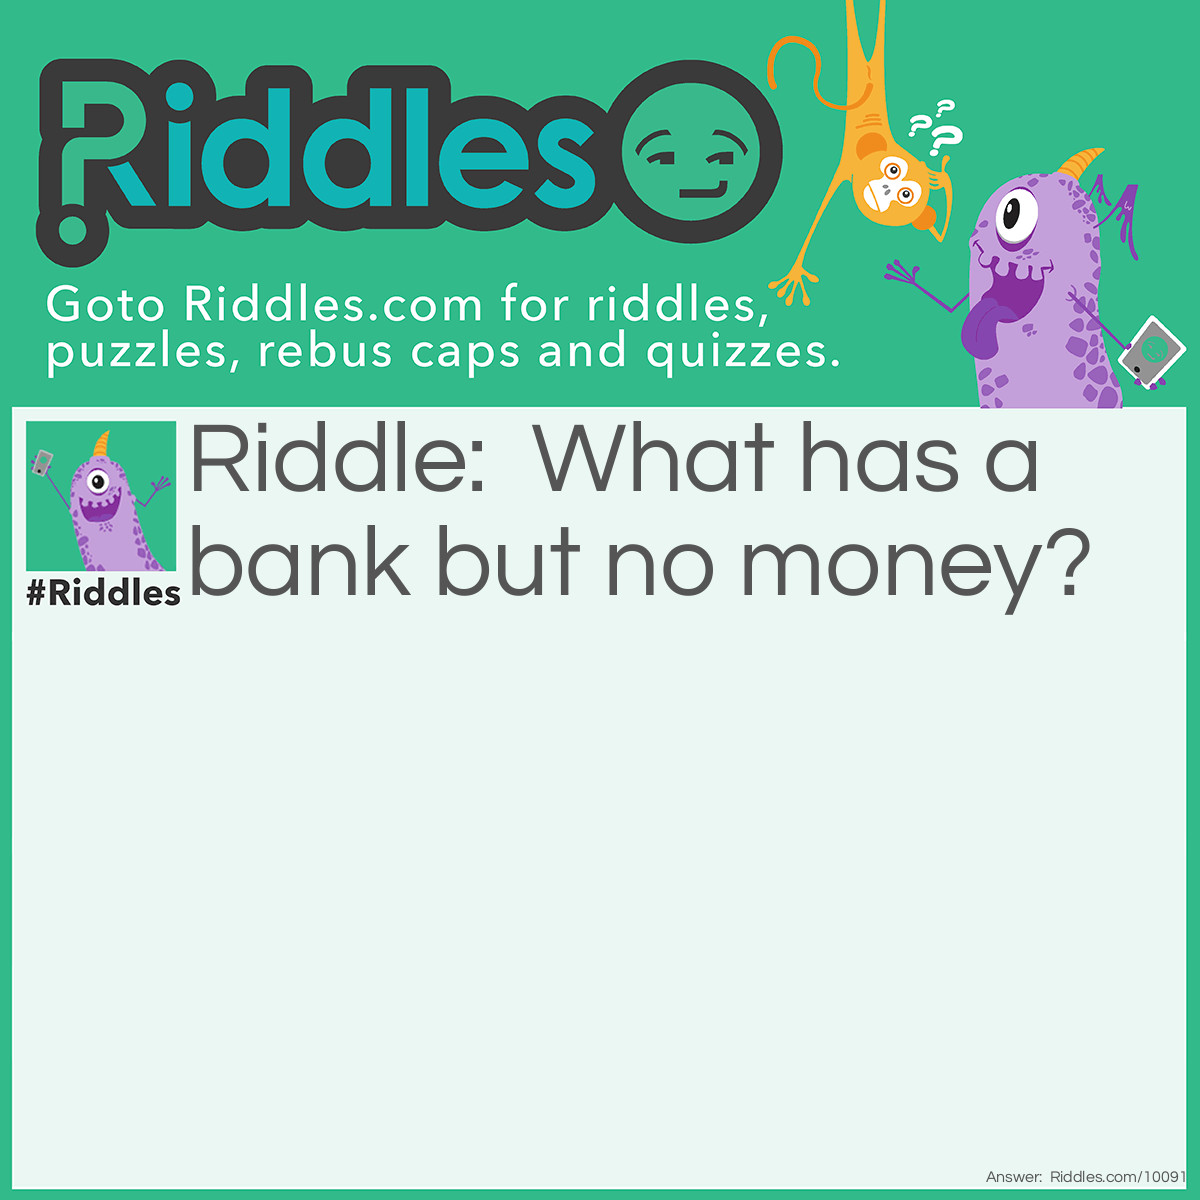 Riddle: What has a bank but no money? Answer: A river bank